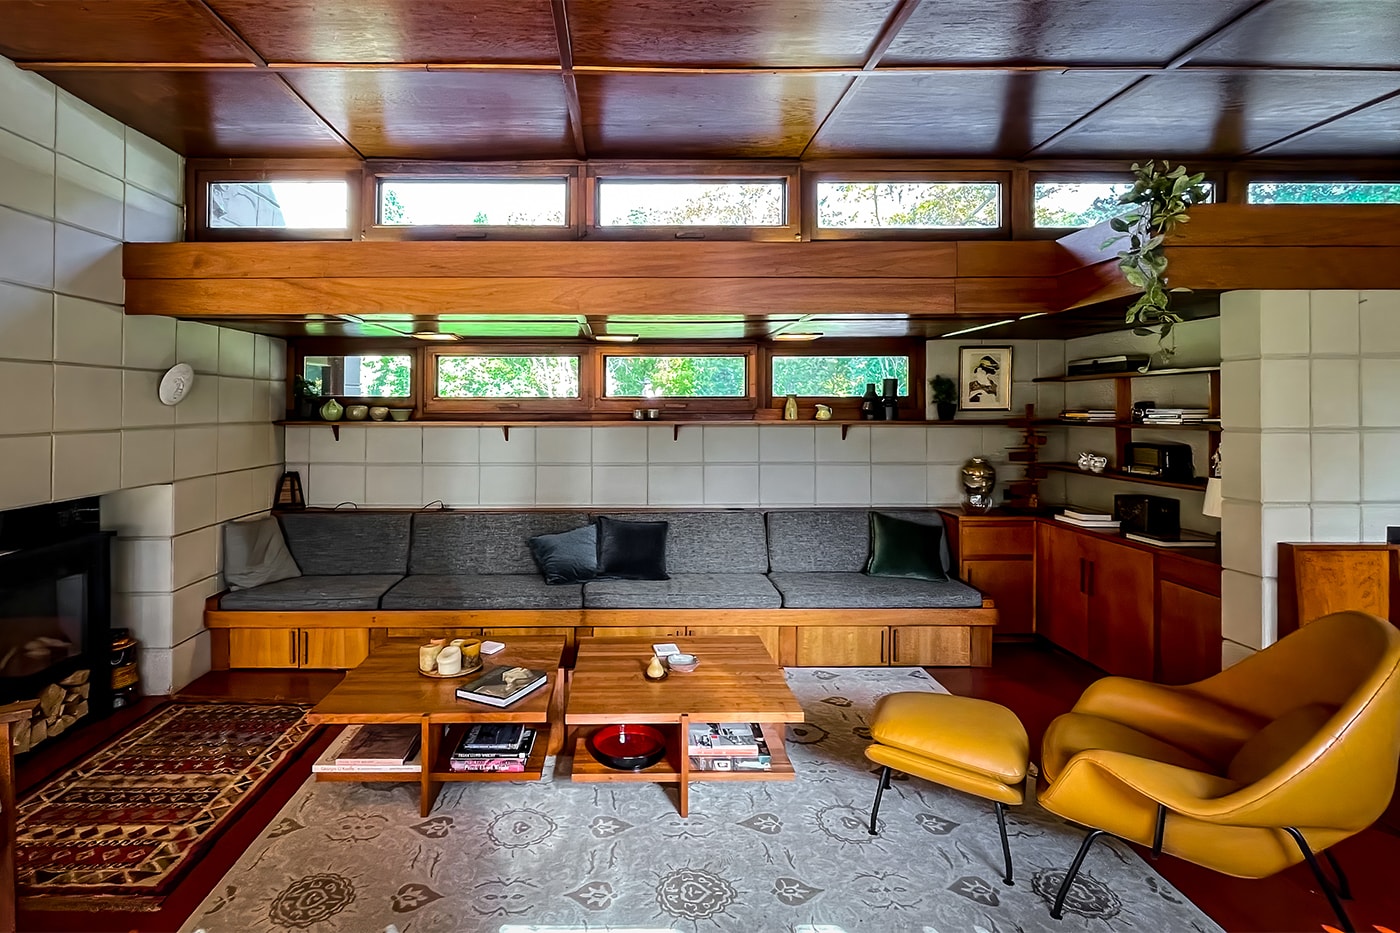 Listings: You Can Now Purchase a Pair of Neighboring Frank Lloyd Wright Houses 